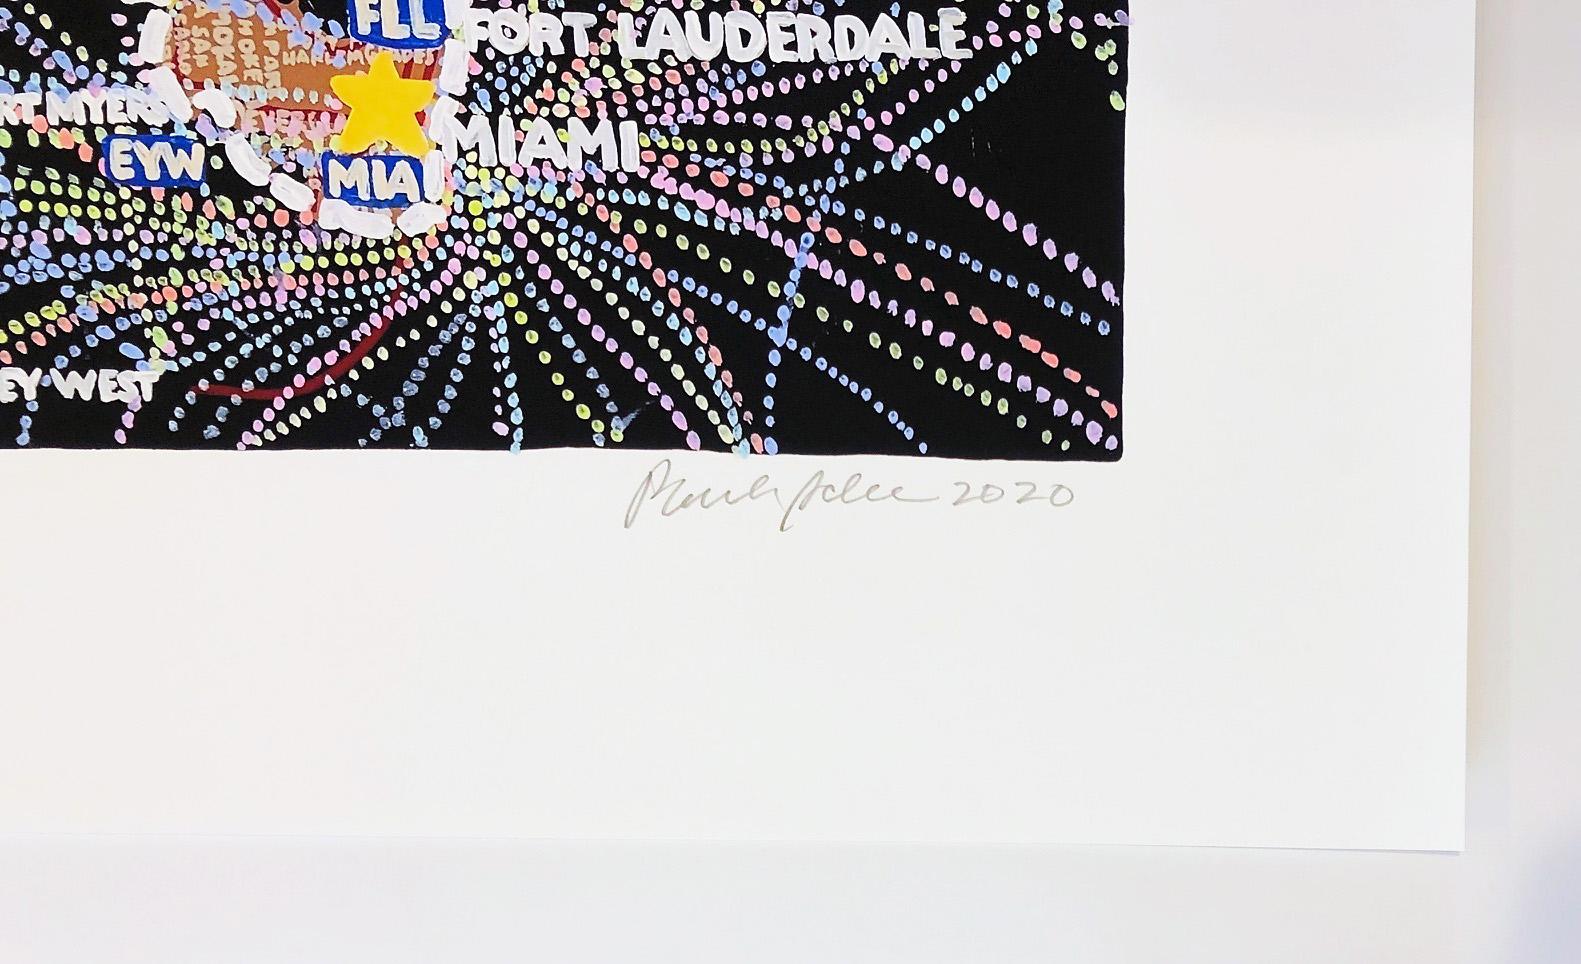 U.S.A. Airline Routes - Print by Paula Scher